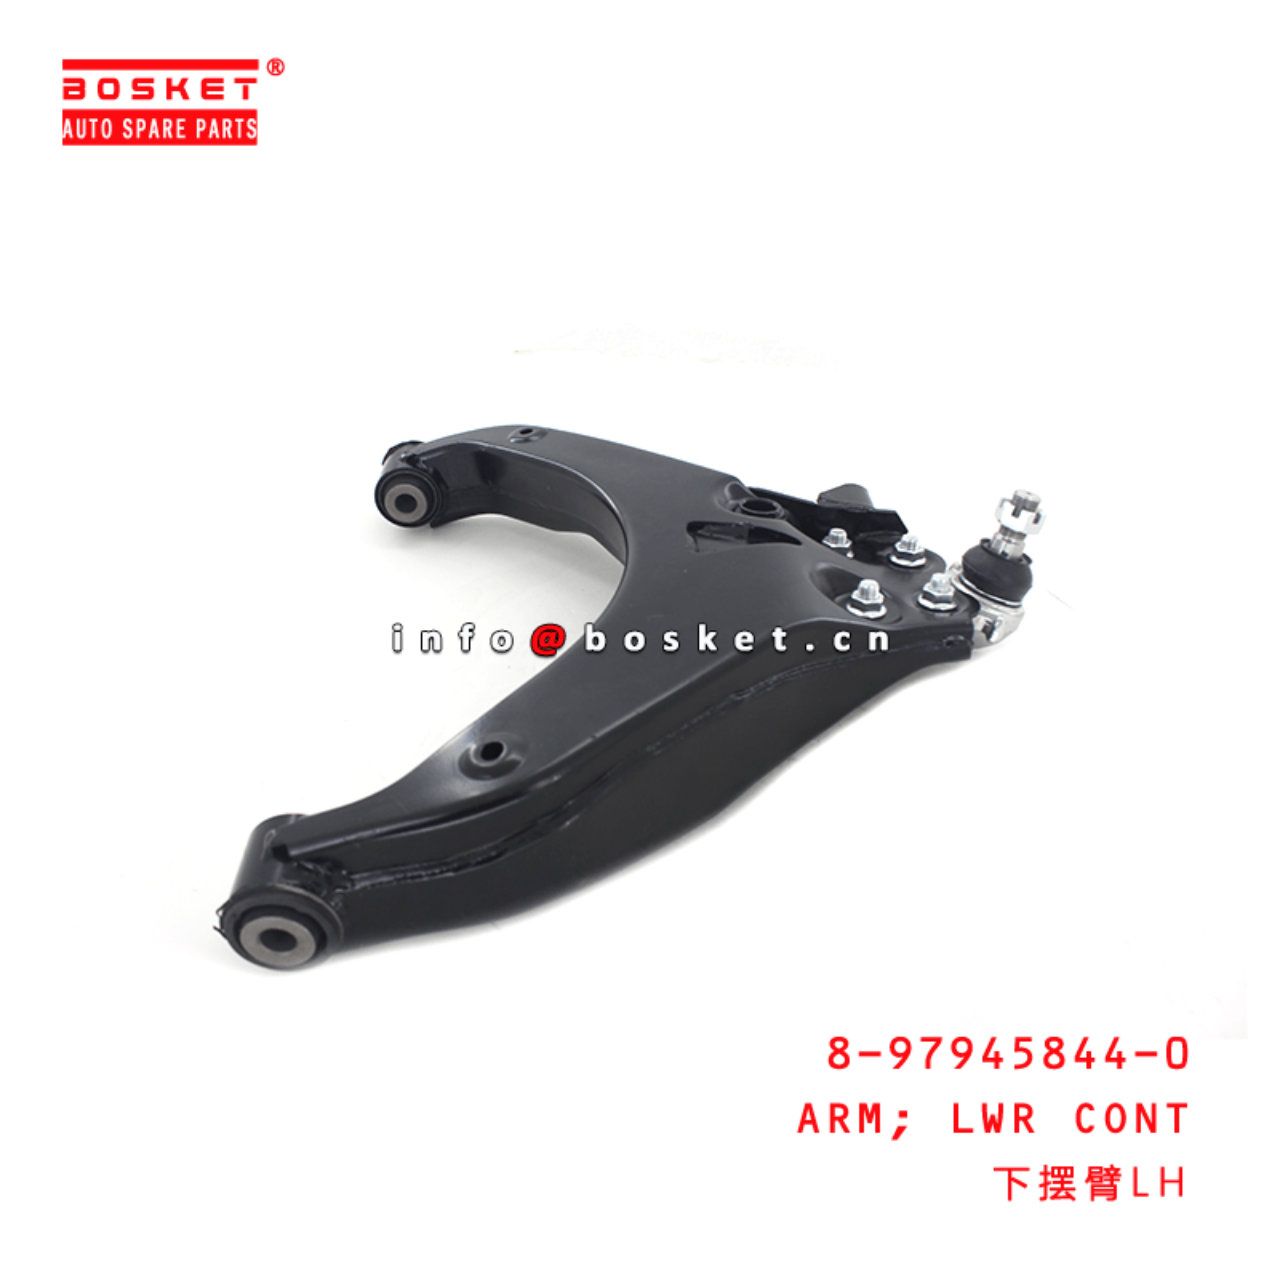  8-97945844-0 Lower Control Arm 8979458440 Suitable for ISUZU DMAX12 4X4